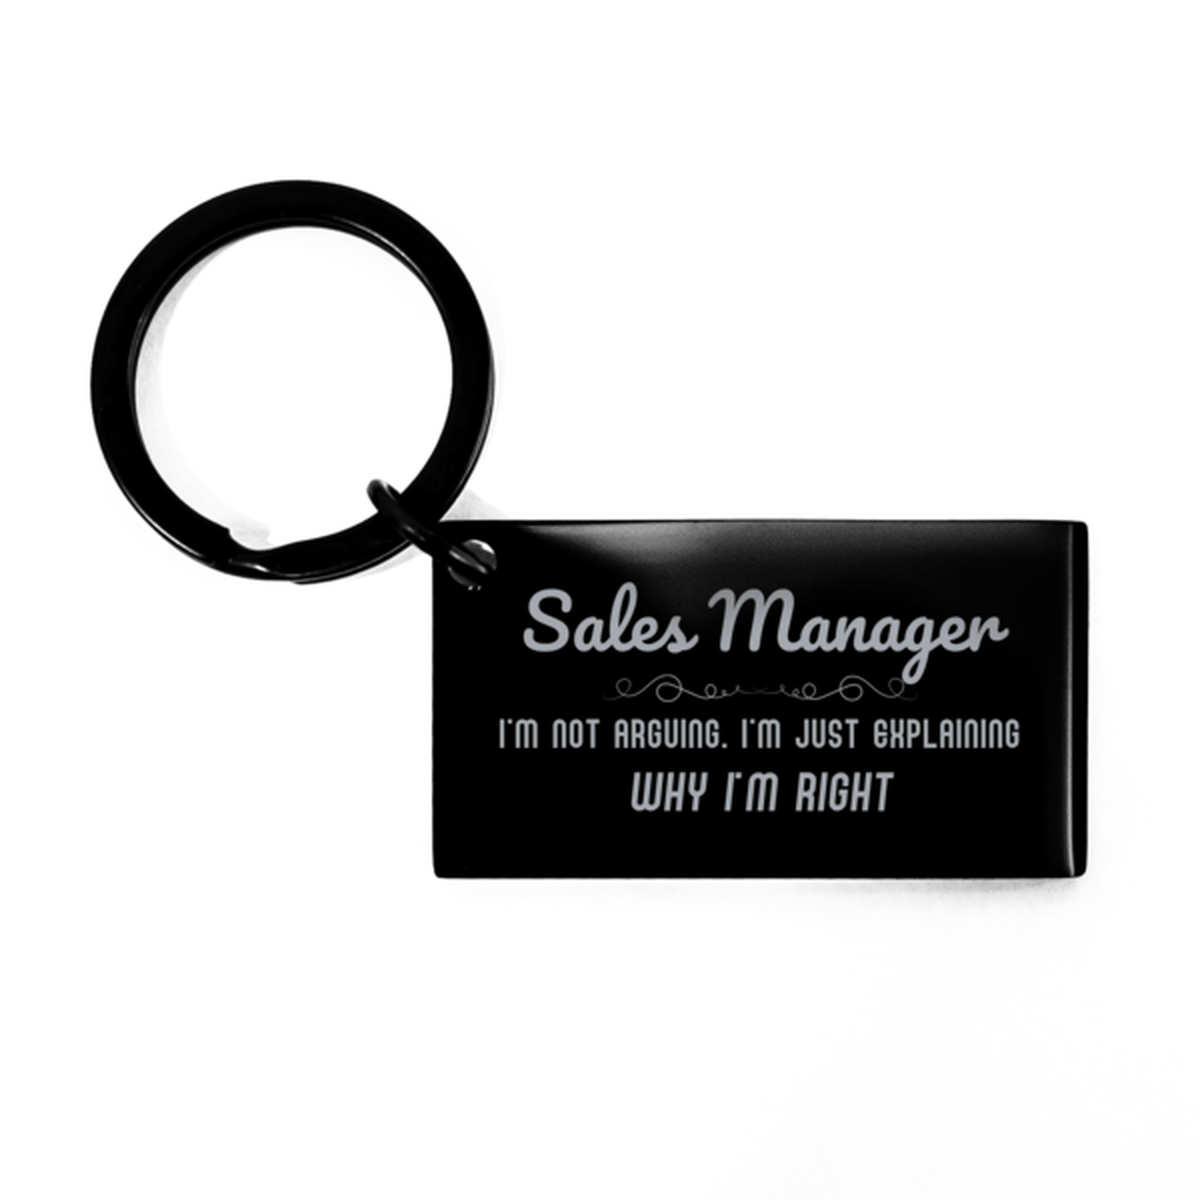 Sales Manager I'm not Arguing. I'm Just Explaining Why I'm RIGHT Keychain, Funny Saying Quote Sales Manager Gifts For Sales Manager Graduation Birthday Christmas Gifts for Men Women Coworker